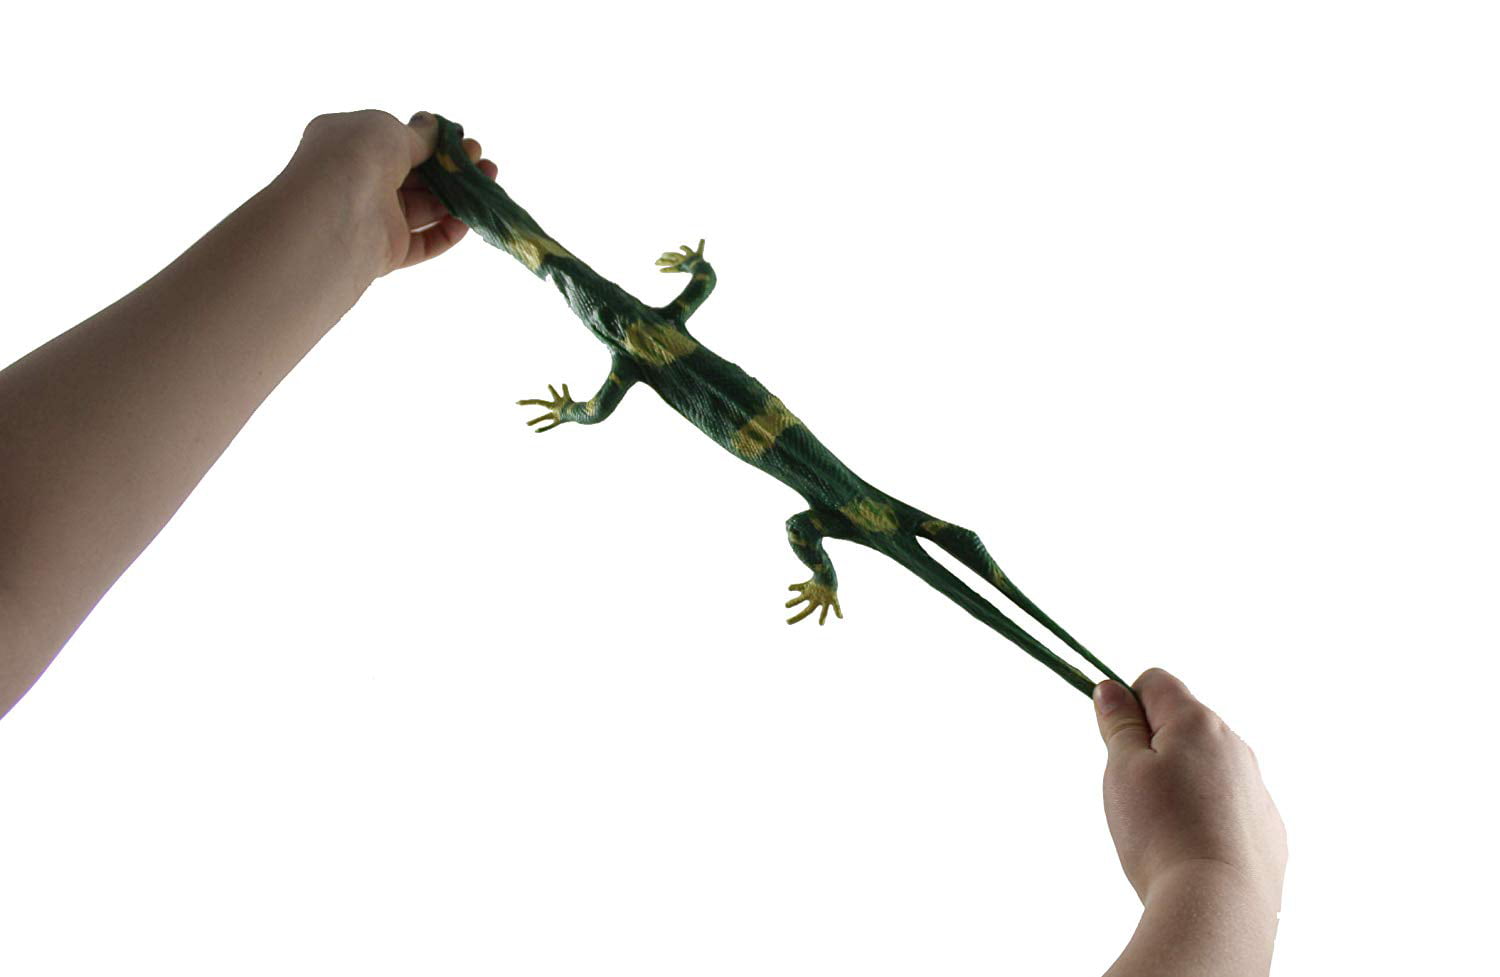 4 assorted color SUPER STRETCH NOVELTY REALISTIC LIZARDS new play toy lizard 